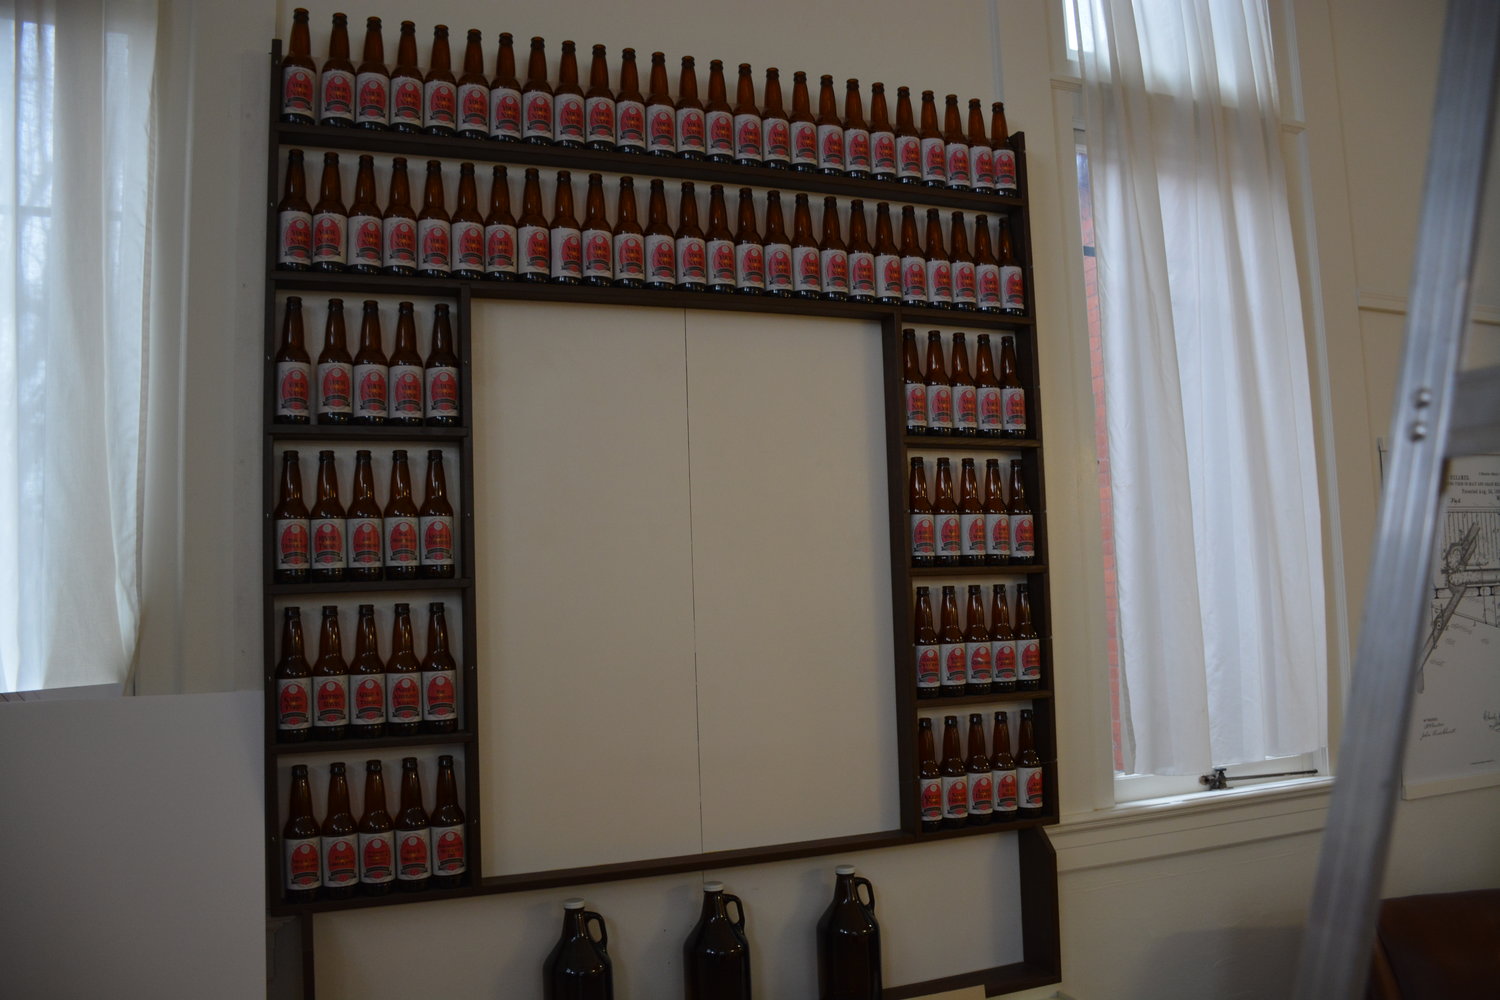 Supporters of the museum “purchase” beer bottles to line a wall in the exhibit. The bottles are available until there’s “99 Bottles of Beer on the Wall.”